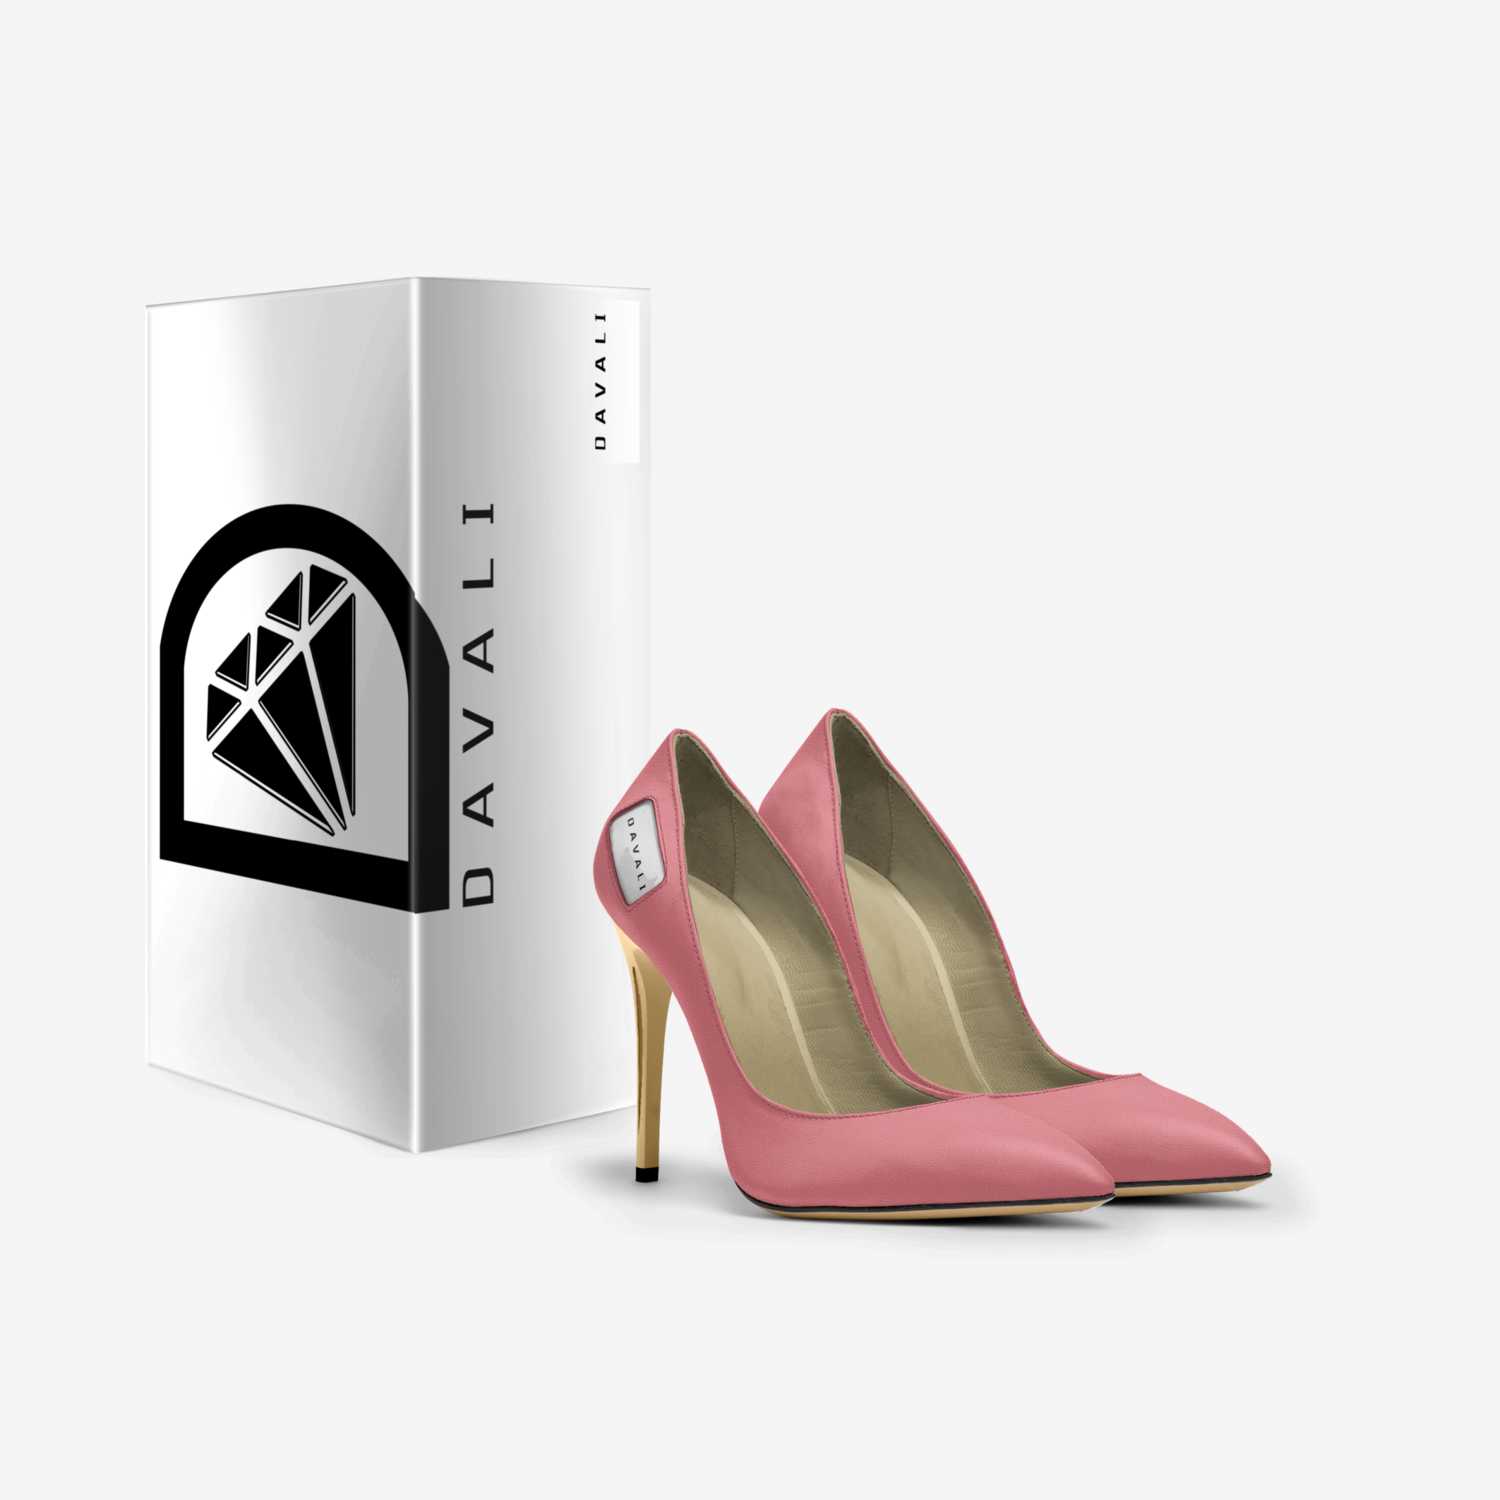 Davali custom made in Italy shoes by Tekala Williams | Box view